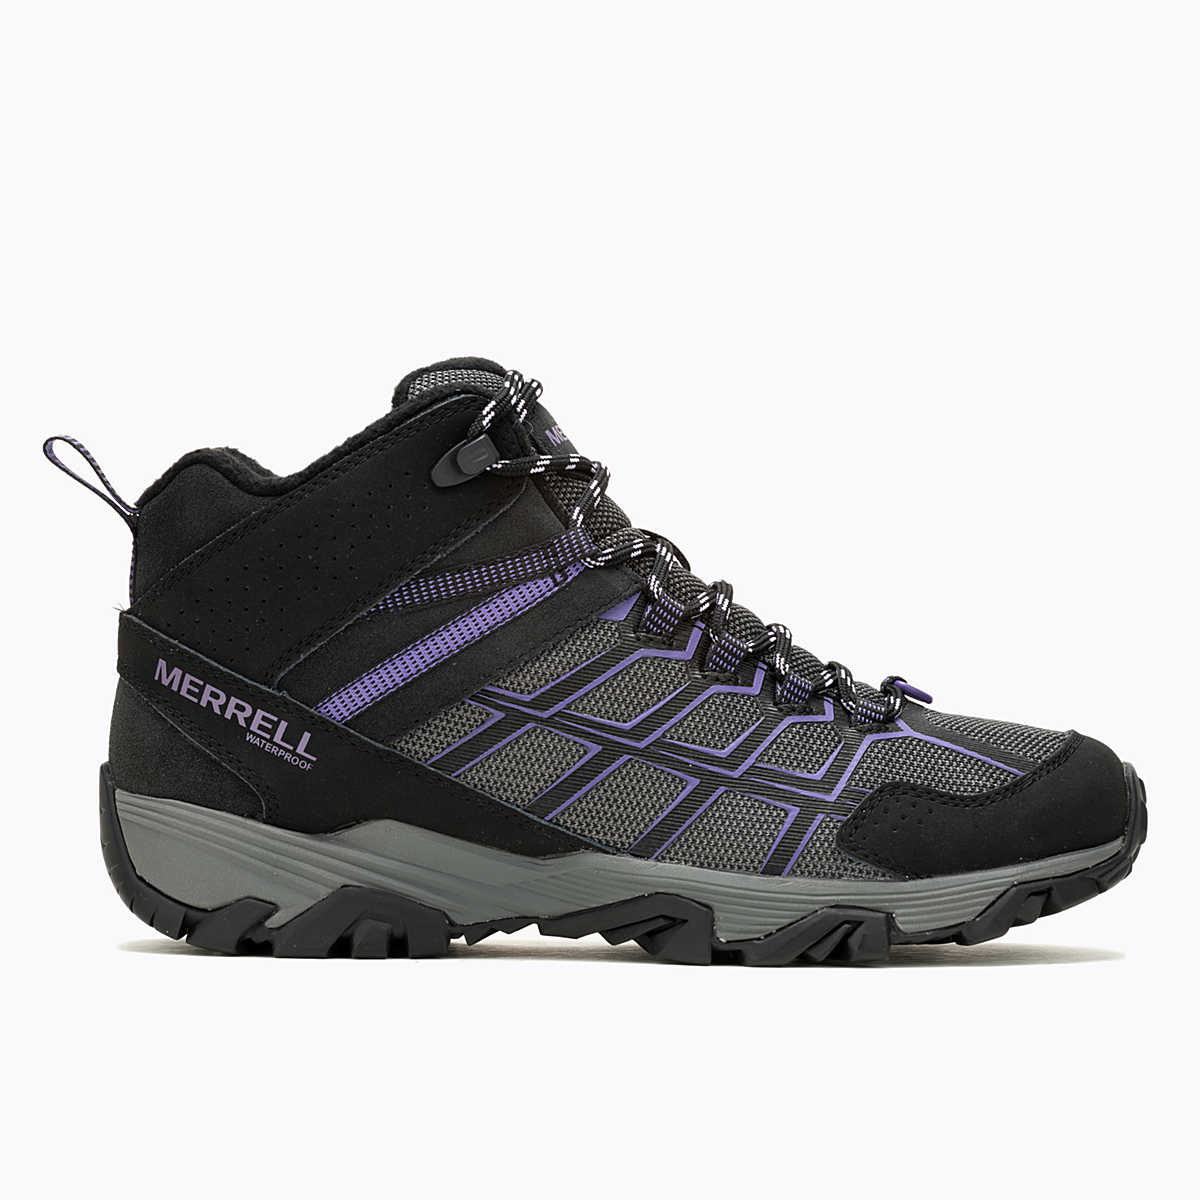 Moab FST 3 Thermo Mid Waterproof, Black/Flora, dynamic 1